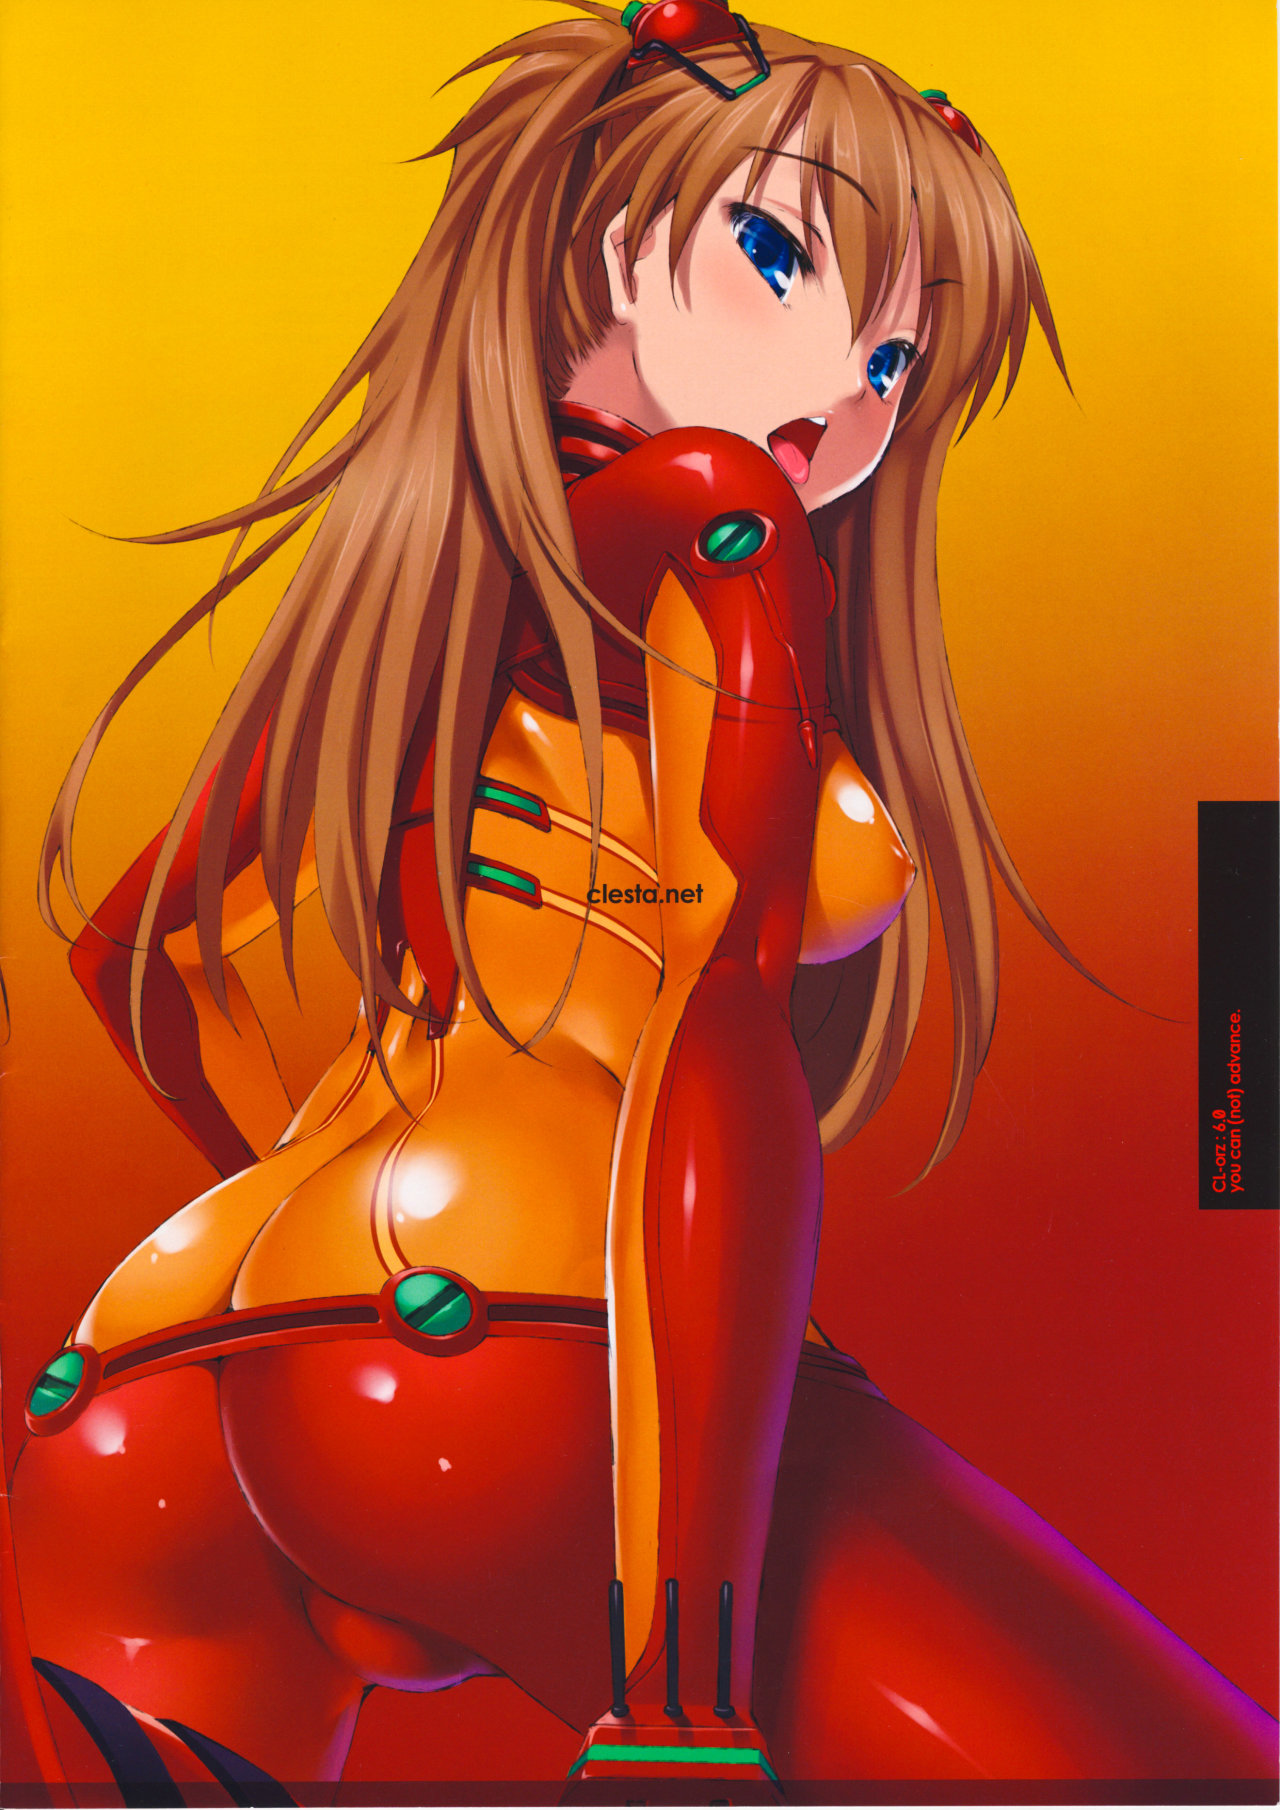 CL-orz 6 you can (not) advance (decensored) (Neon Genesis Evangelion) - Cle Masahiro - 15